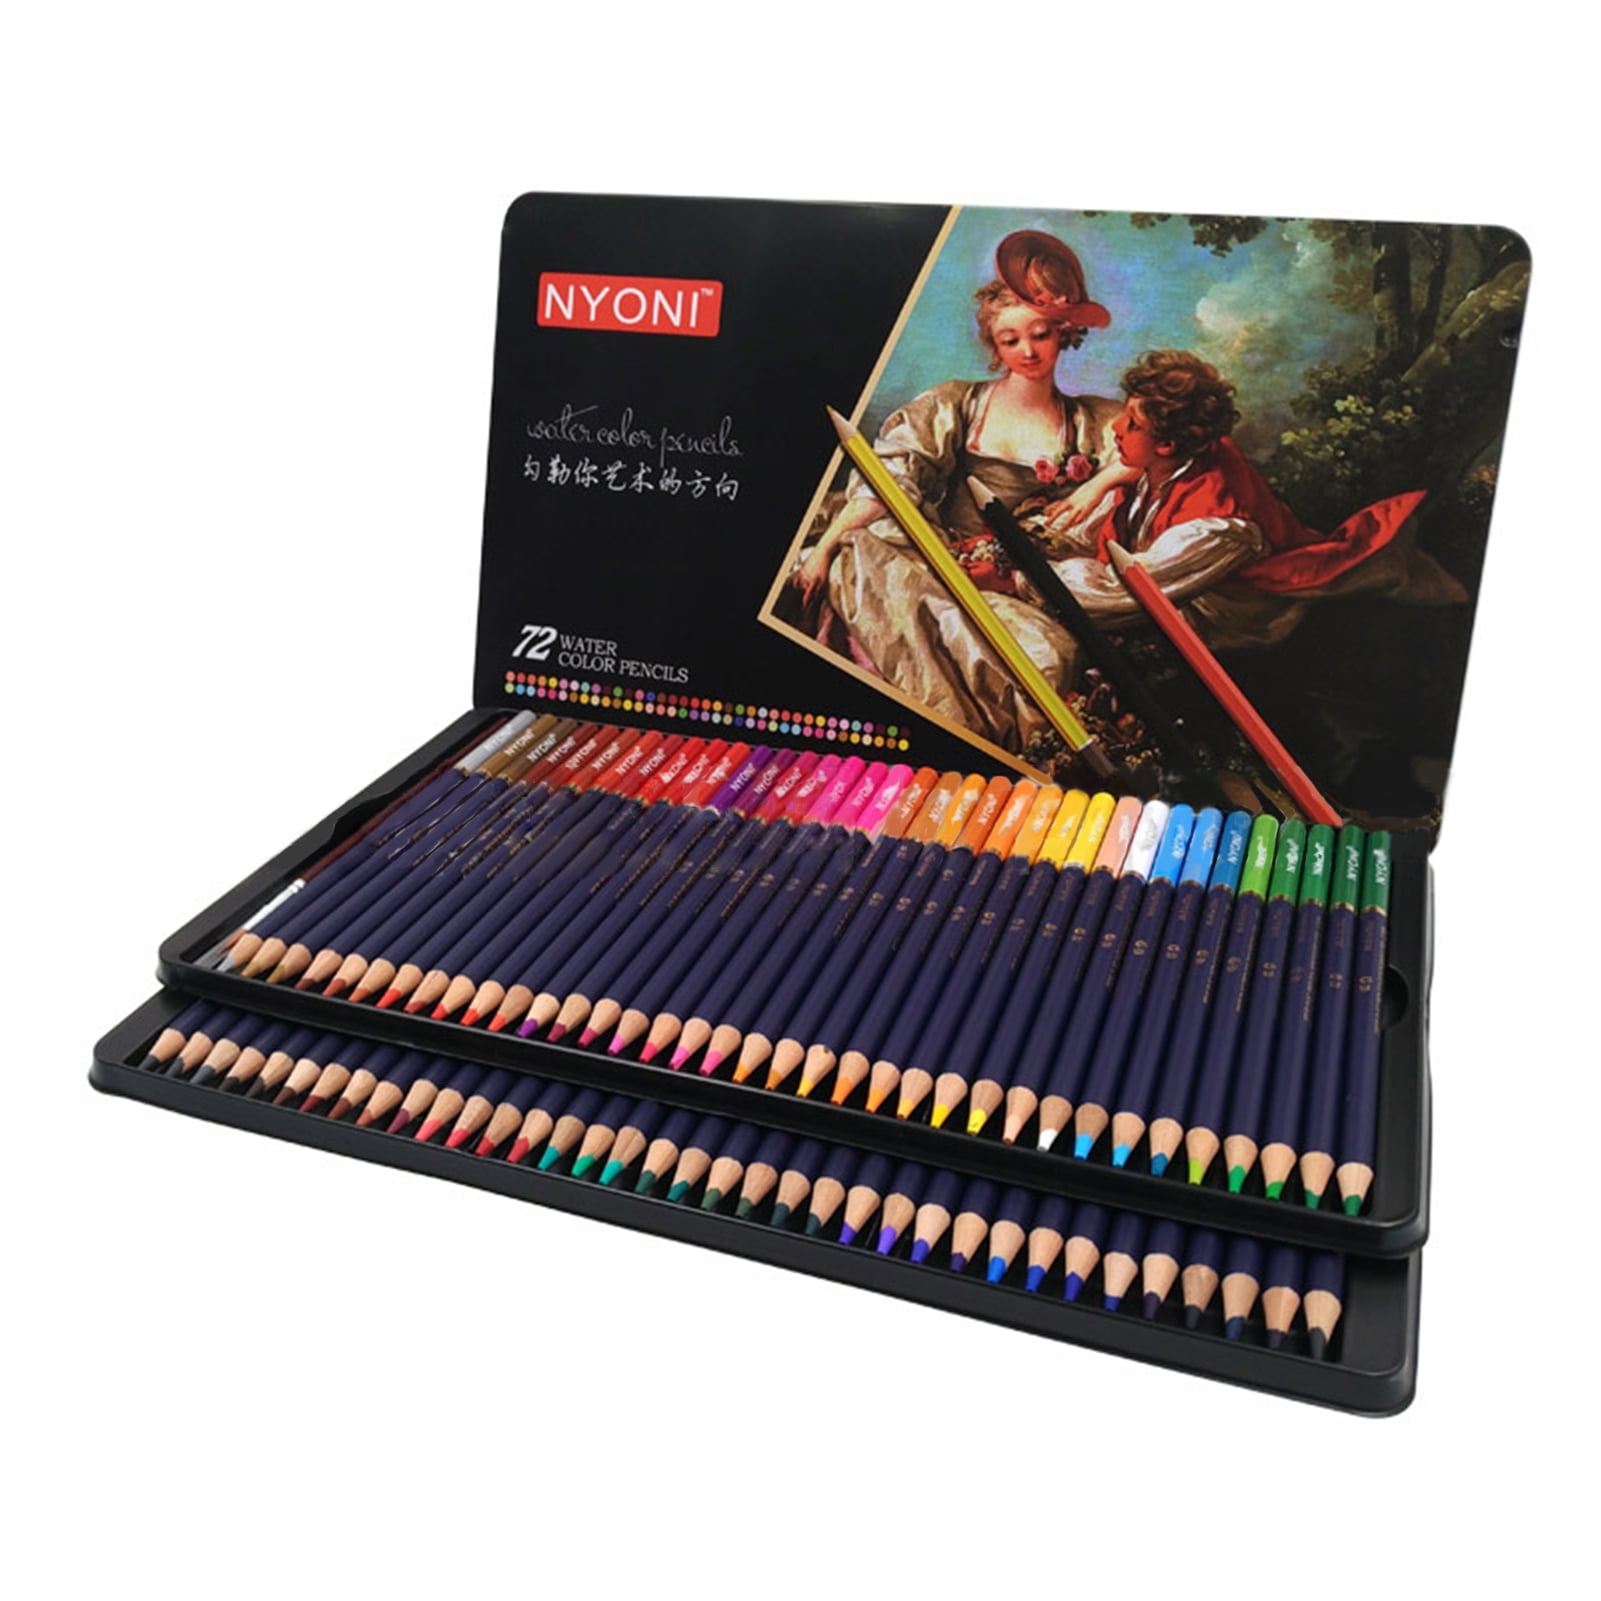 Zenacolor Professional Watercolor Pencils, Set of 72, Metal Box with Brush  - Drawing Set for Coloring, Blending and Layering Books, Adult or Kids